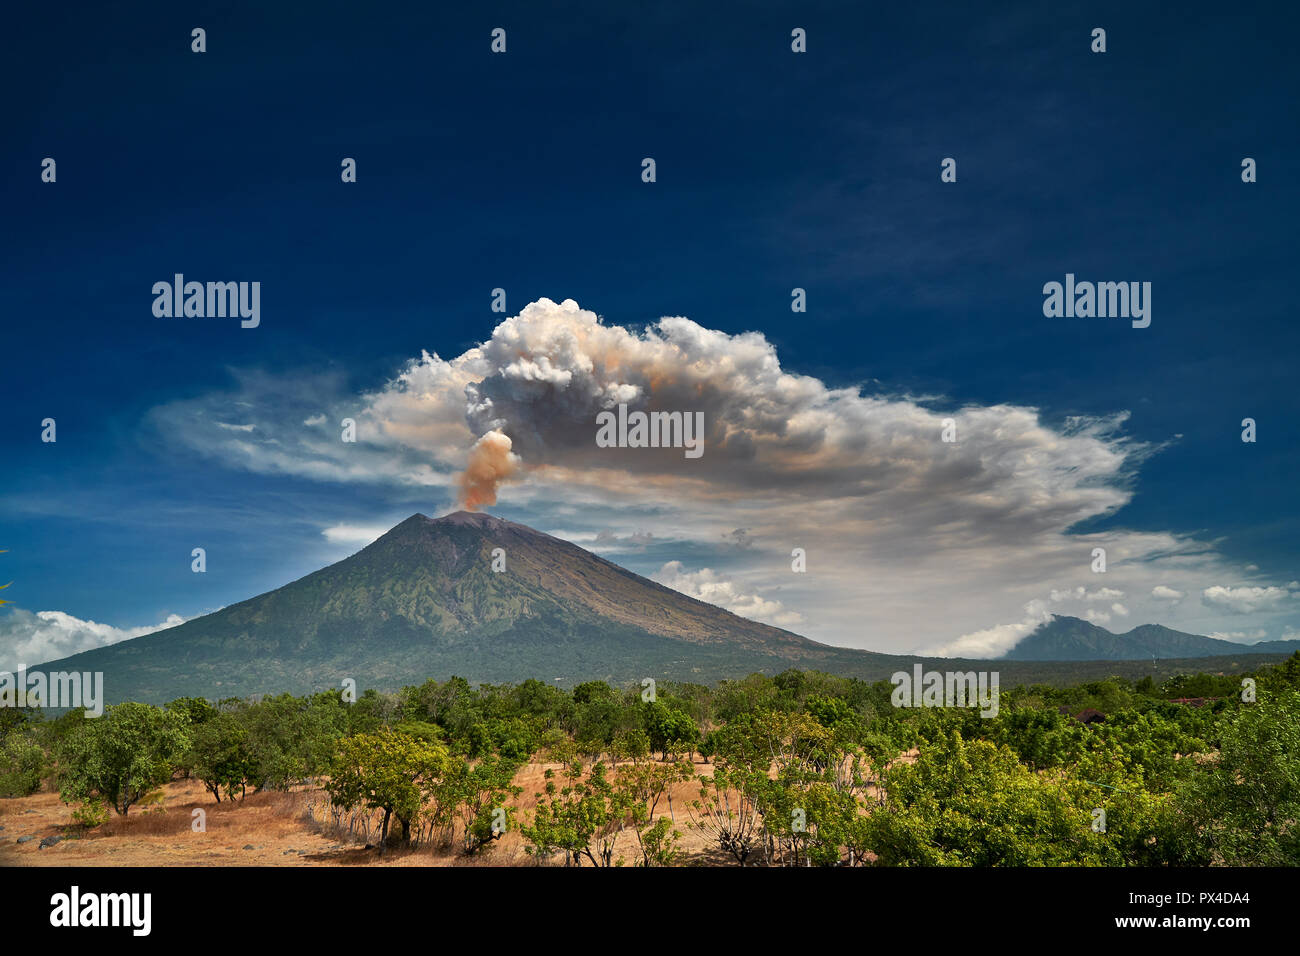 29 June 2018, Bali, Indonesia Mount Agung volcano dramatic eruption over  dark blue sky . Massive clouds of ash higlighted by magma Stock Photo -  Alamy